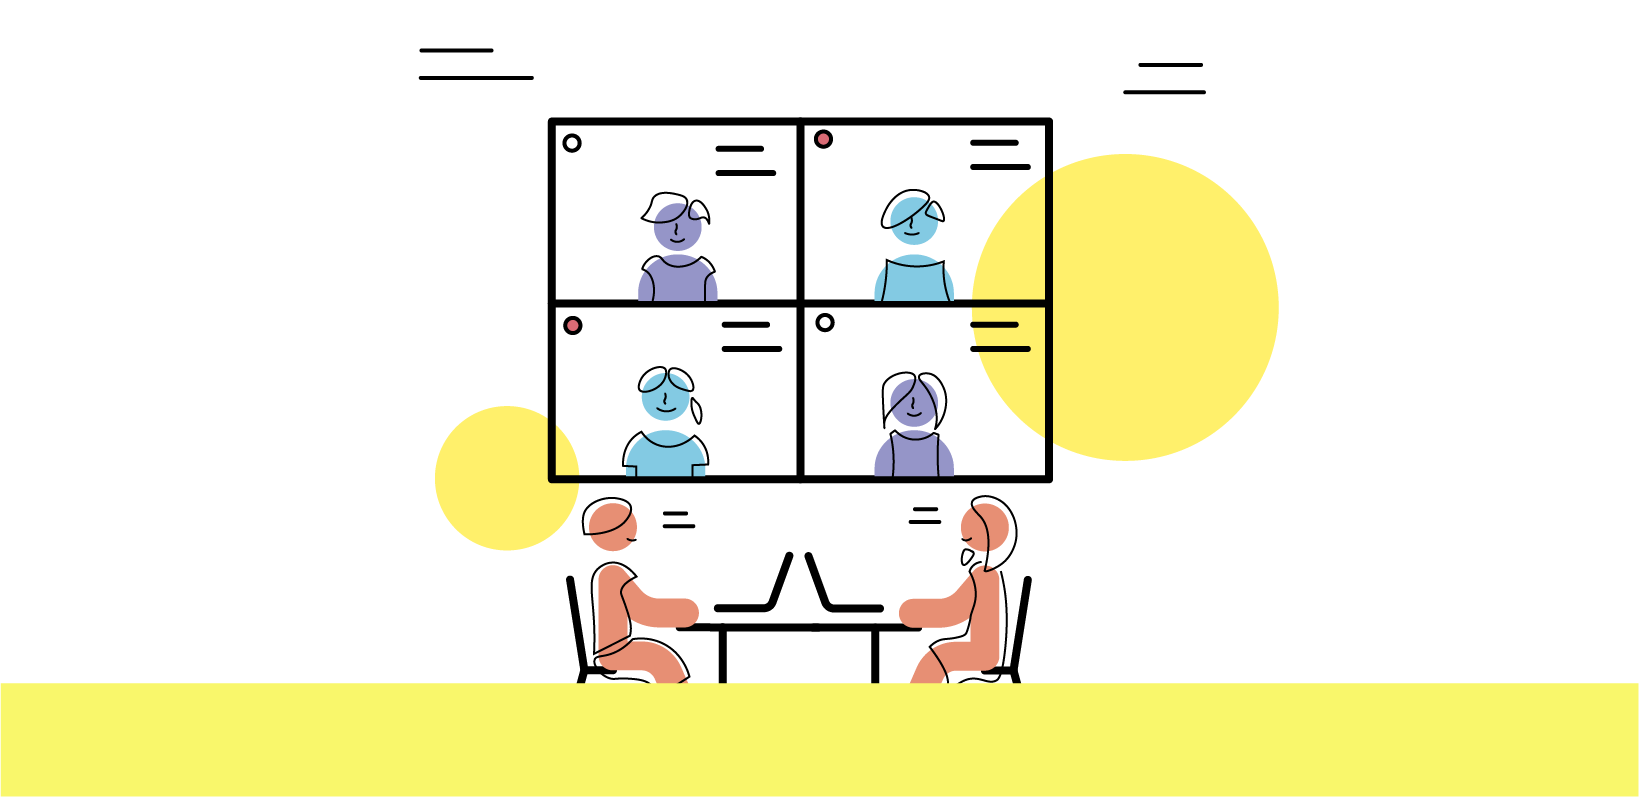 Stylised image showing group work during a video conference